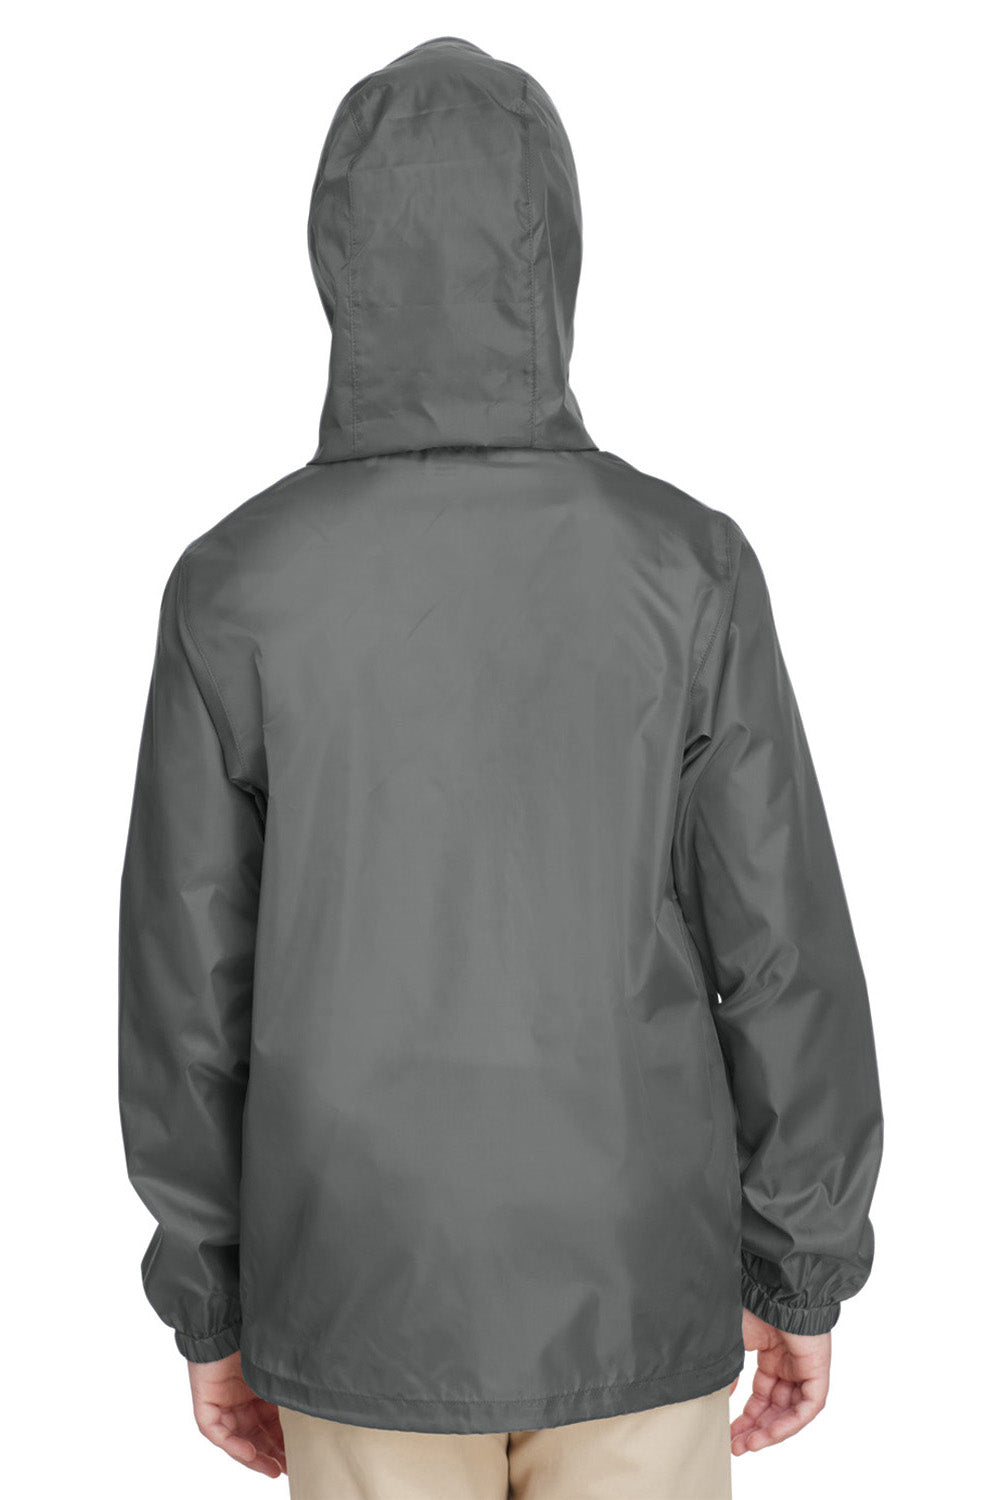 Team 365 TT73Y Youth Zone Protect Water Resistant Full Zip Hooded Jacket Graphite Grey Back